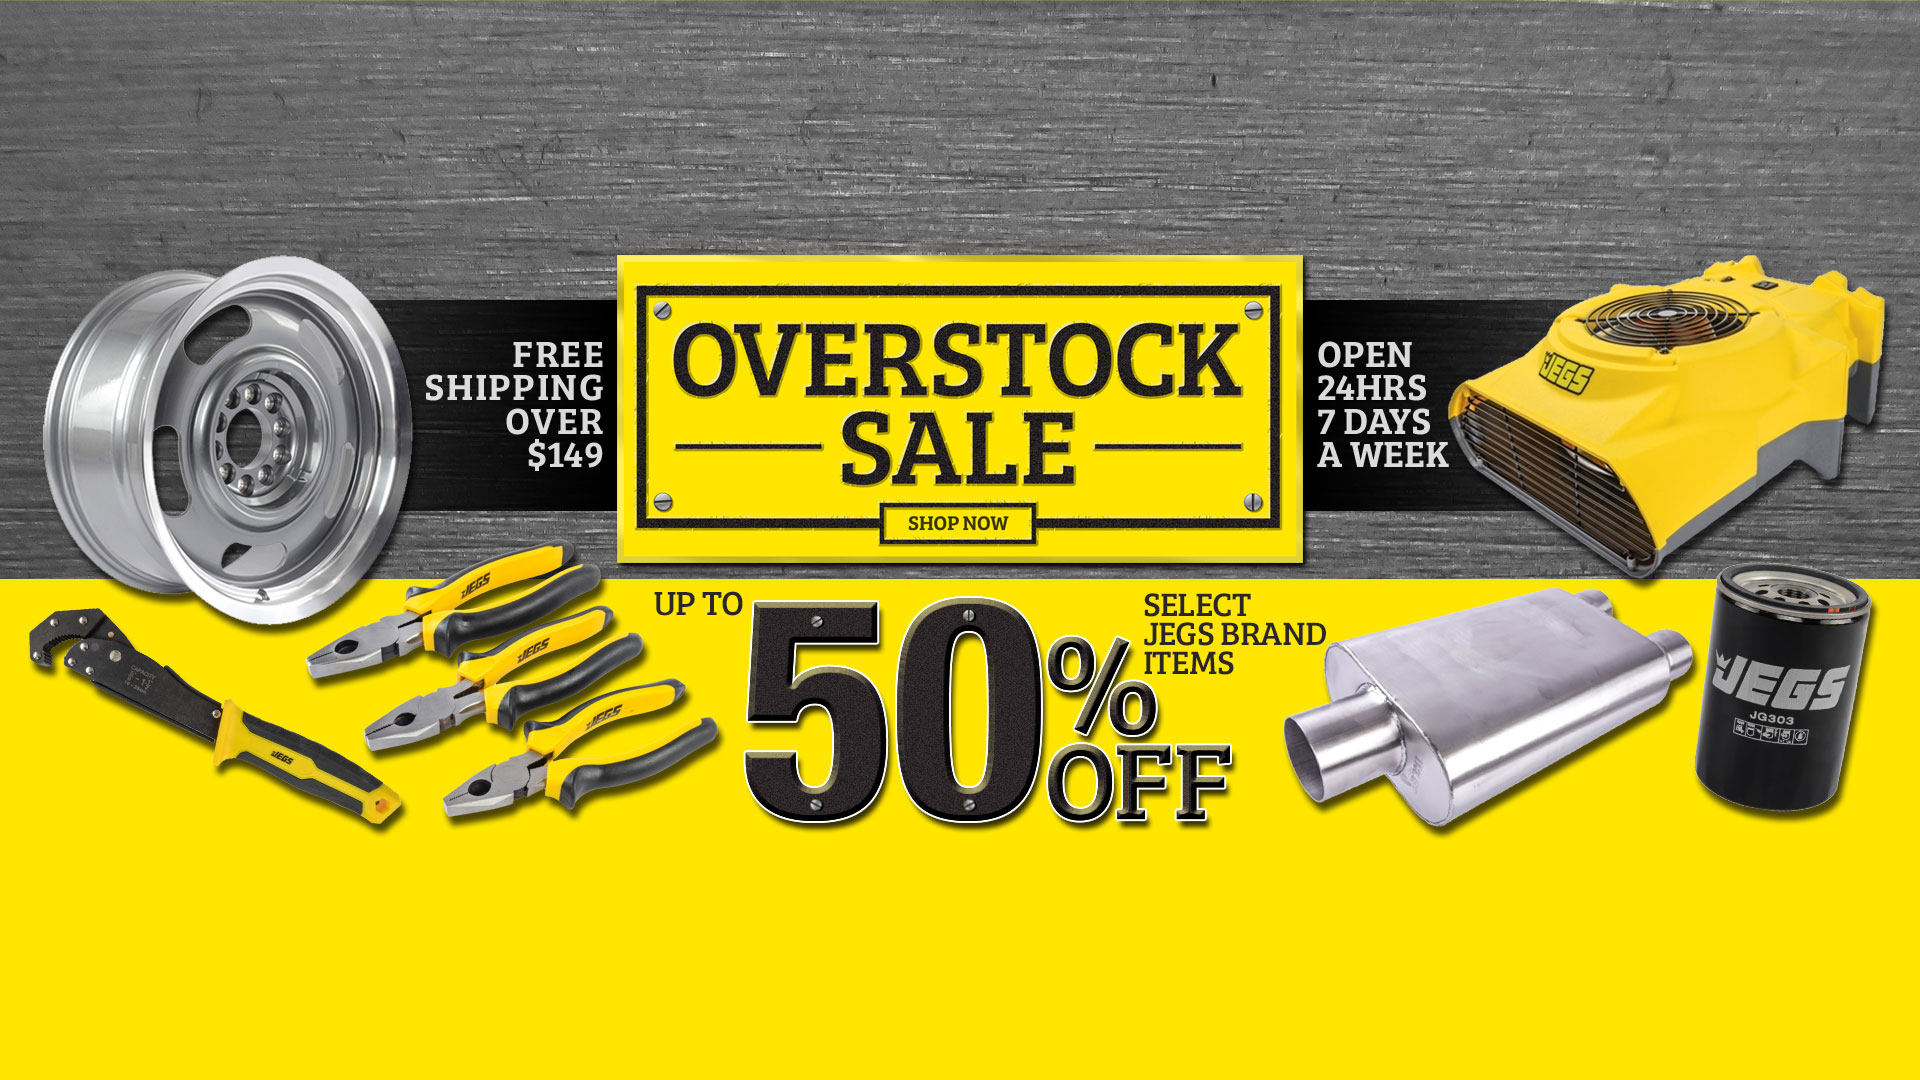 JEGS Overstock Sale - up to 50% off Select JEGS Brand Products